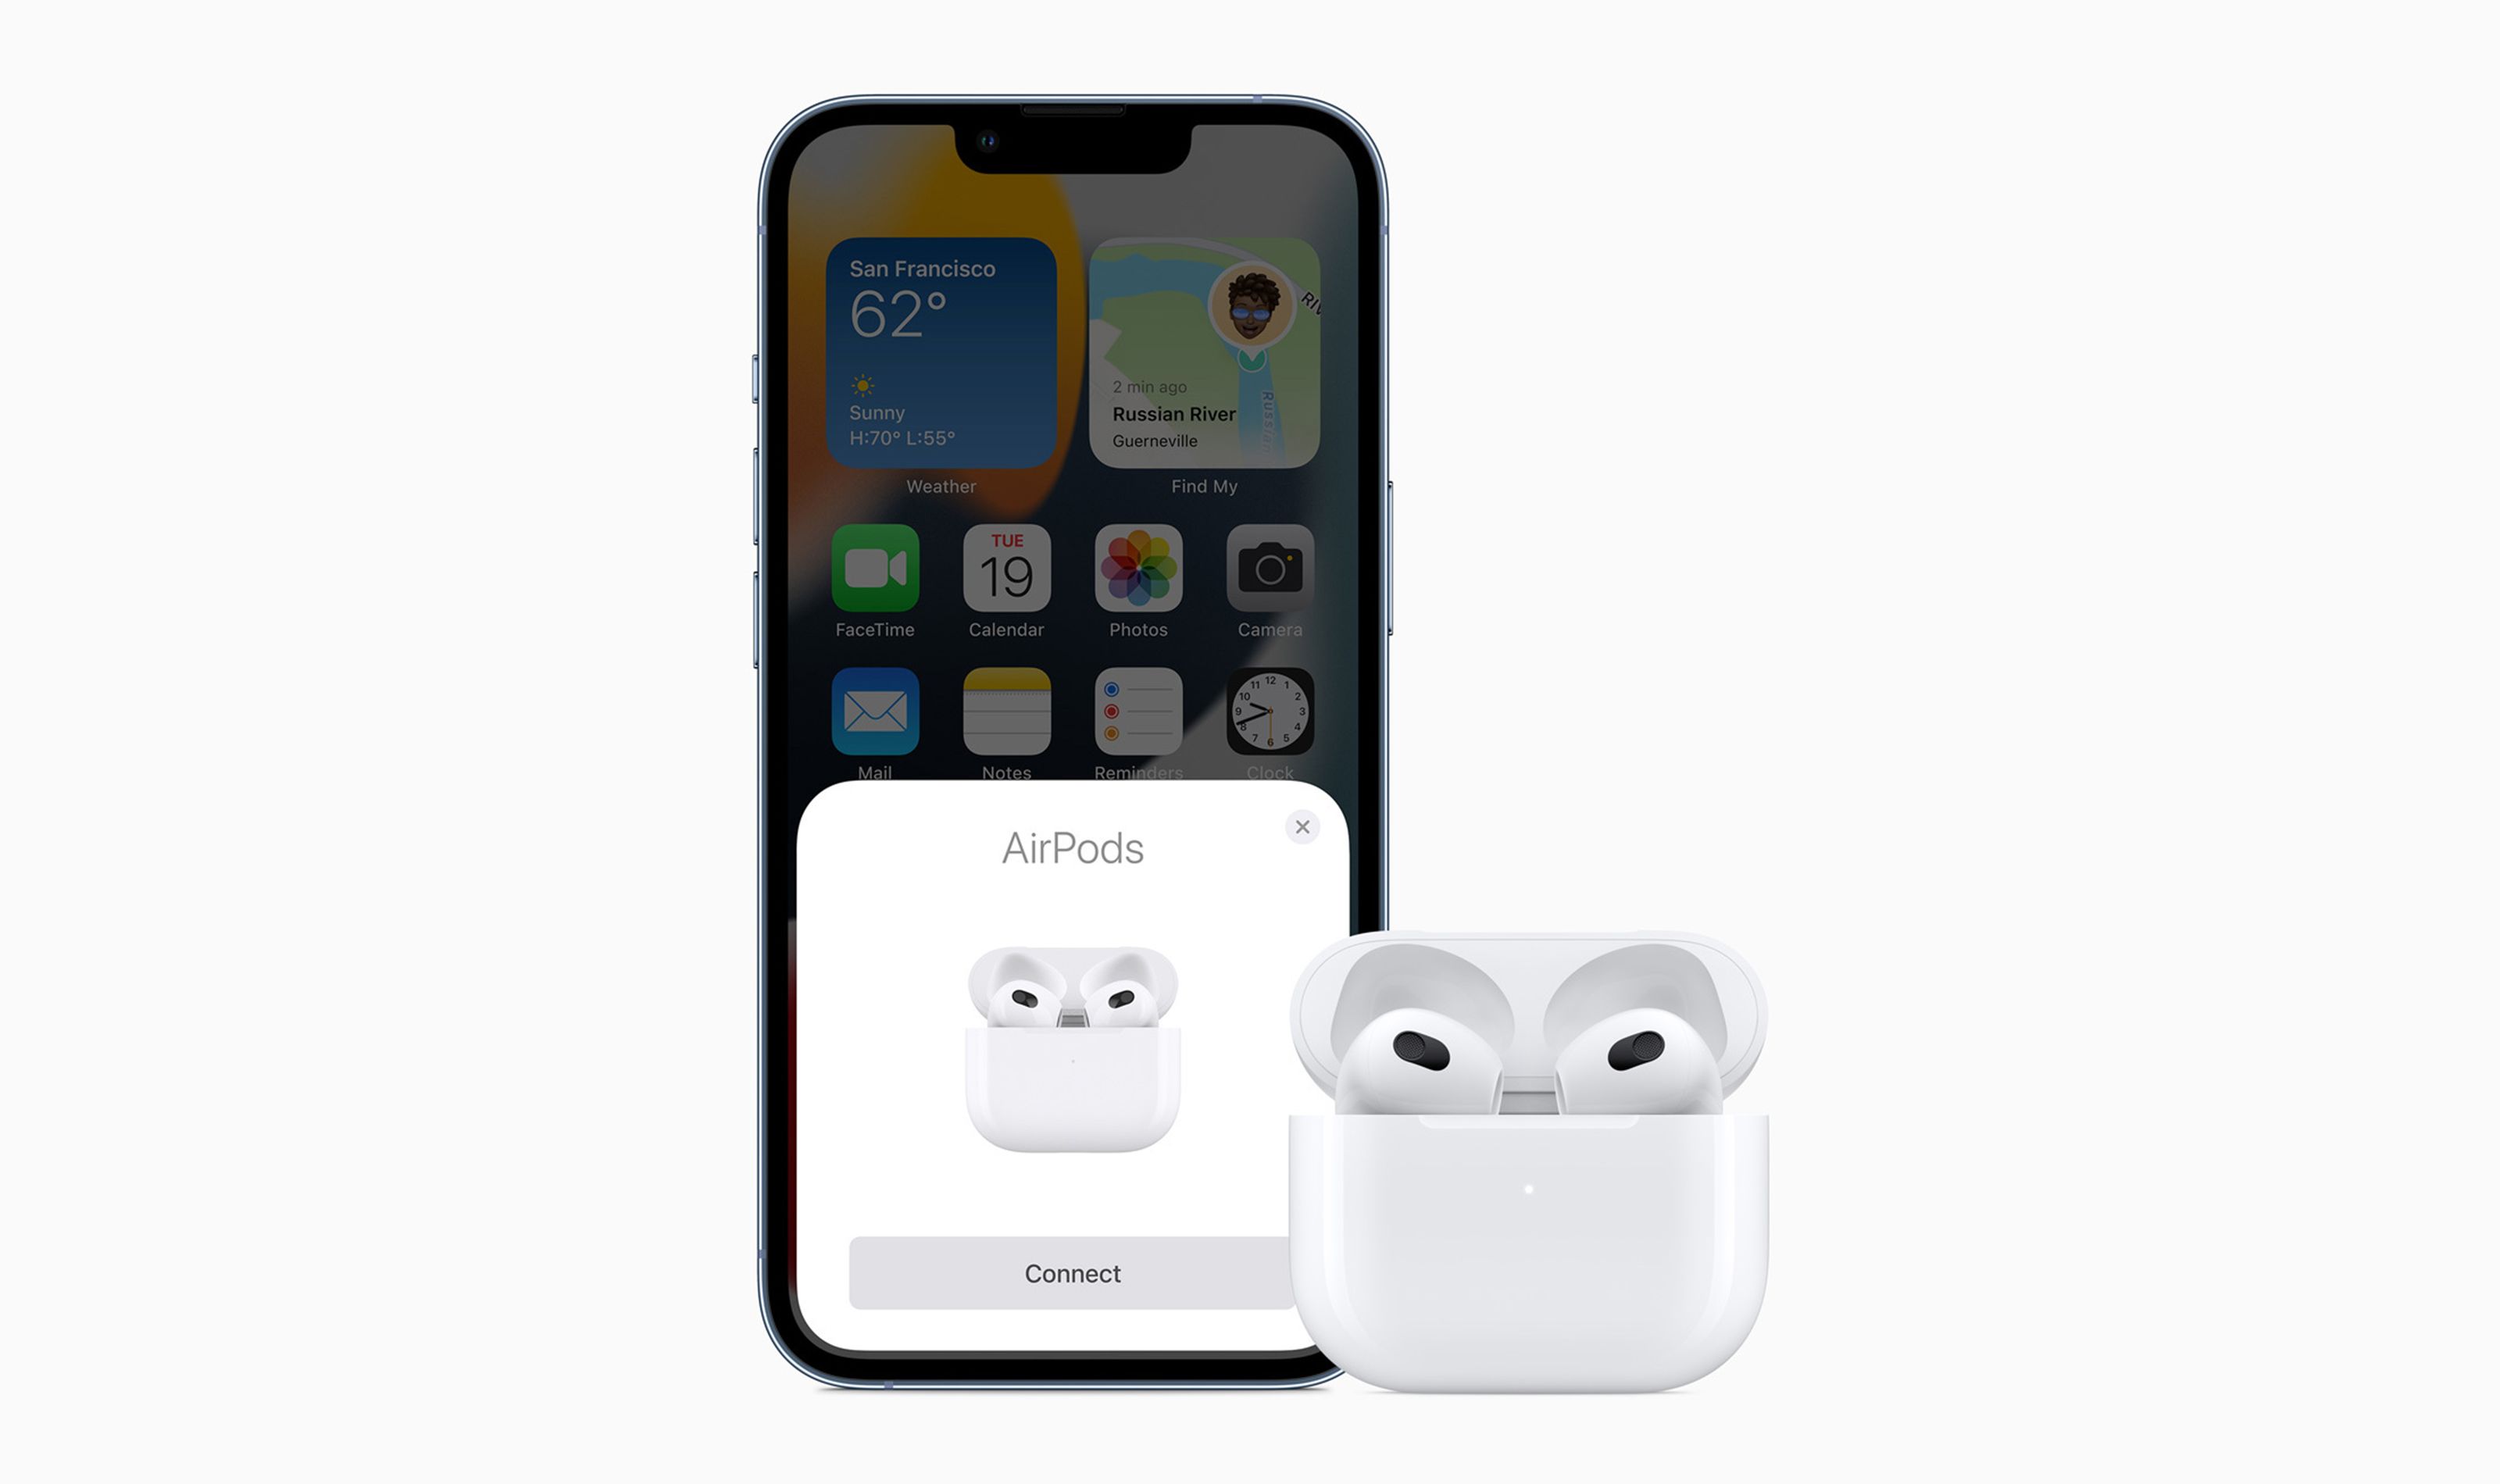 AirPods 3 To Grab Technology & Design Upgrades From AirPods Pro